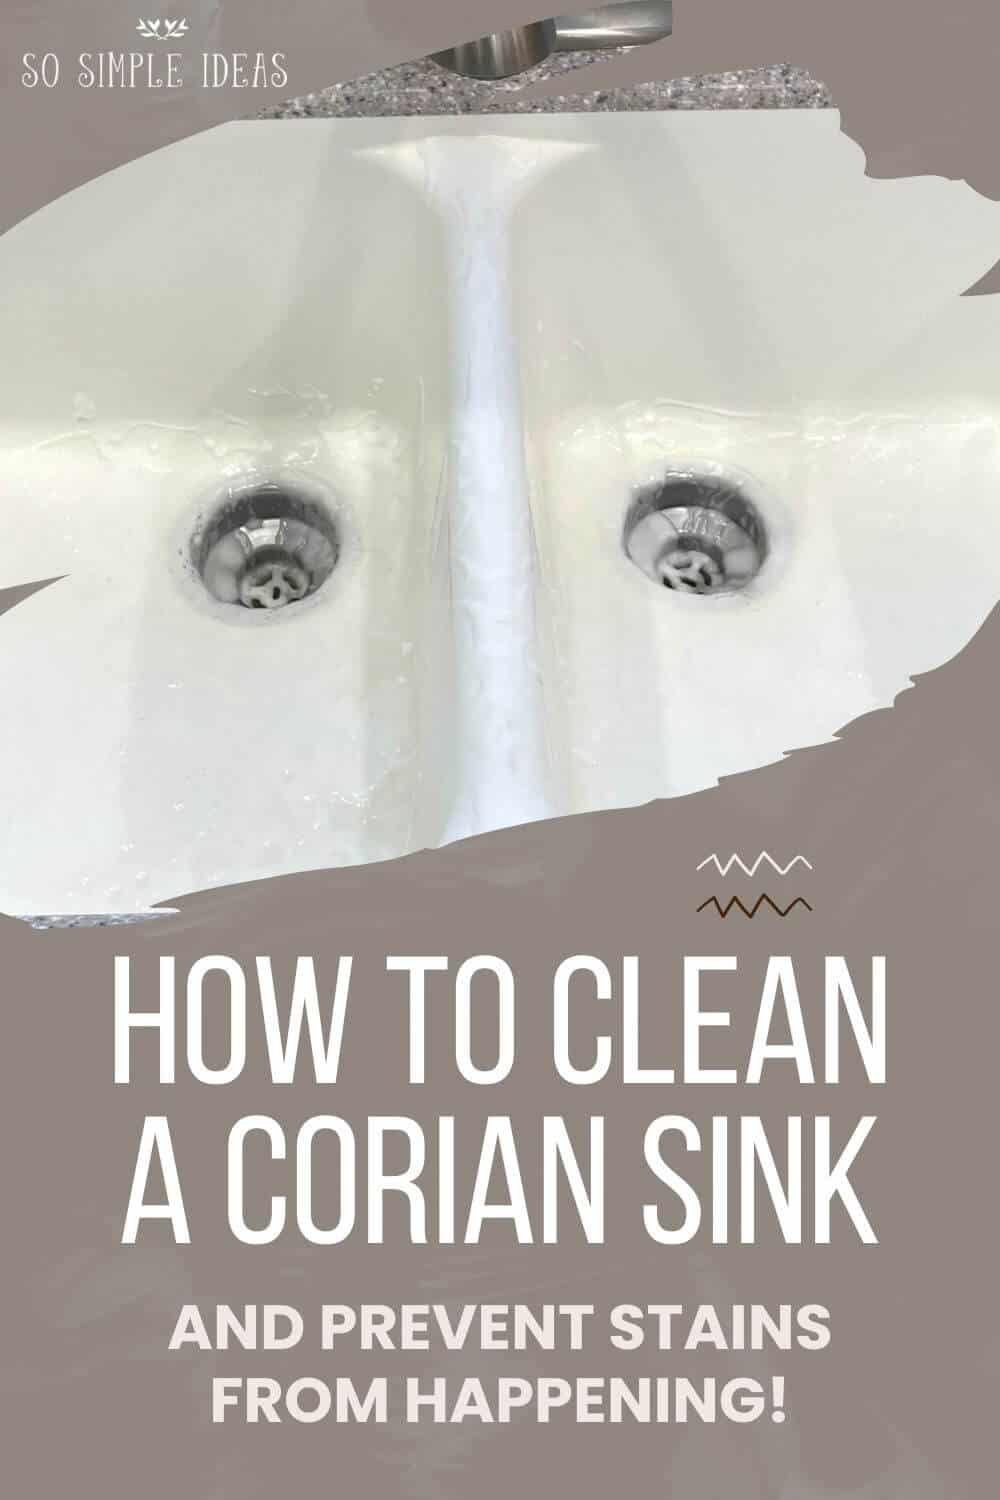 how to clean a corian sink pinterest image.